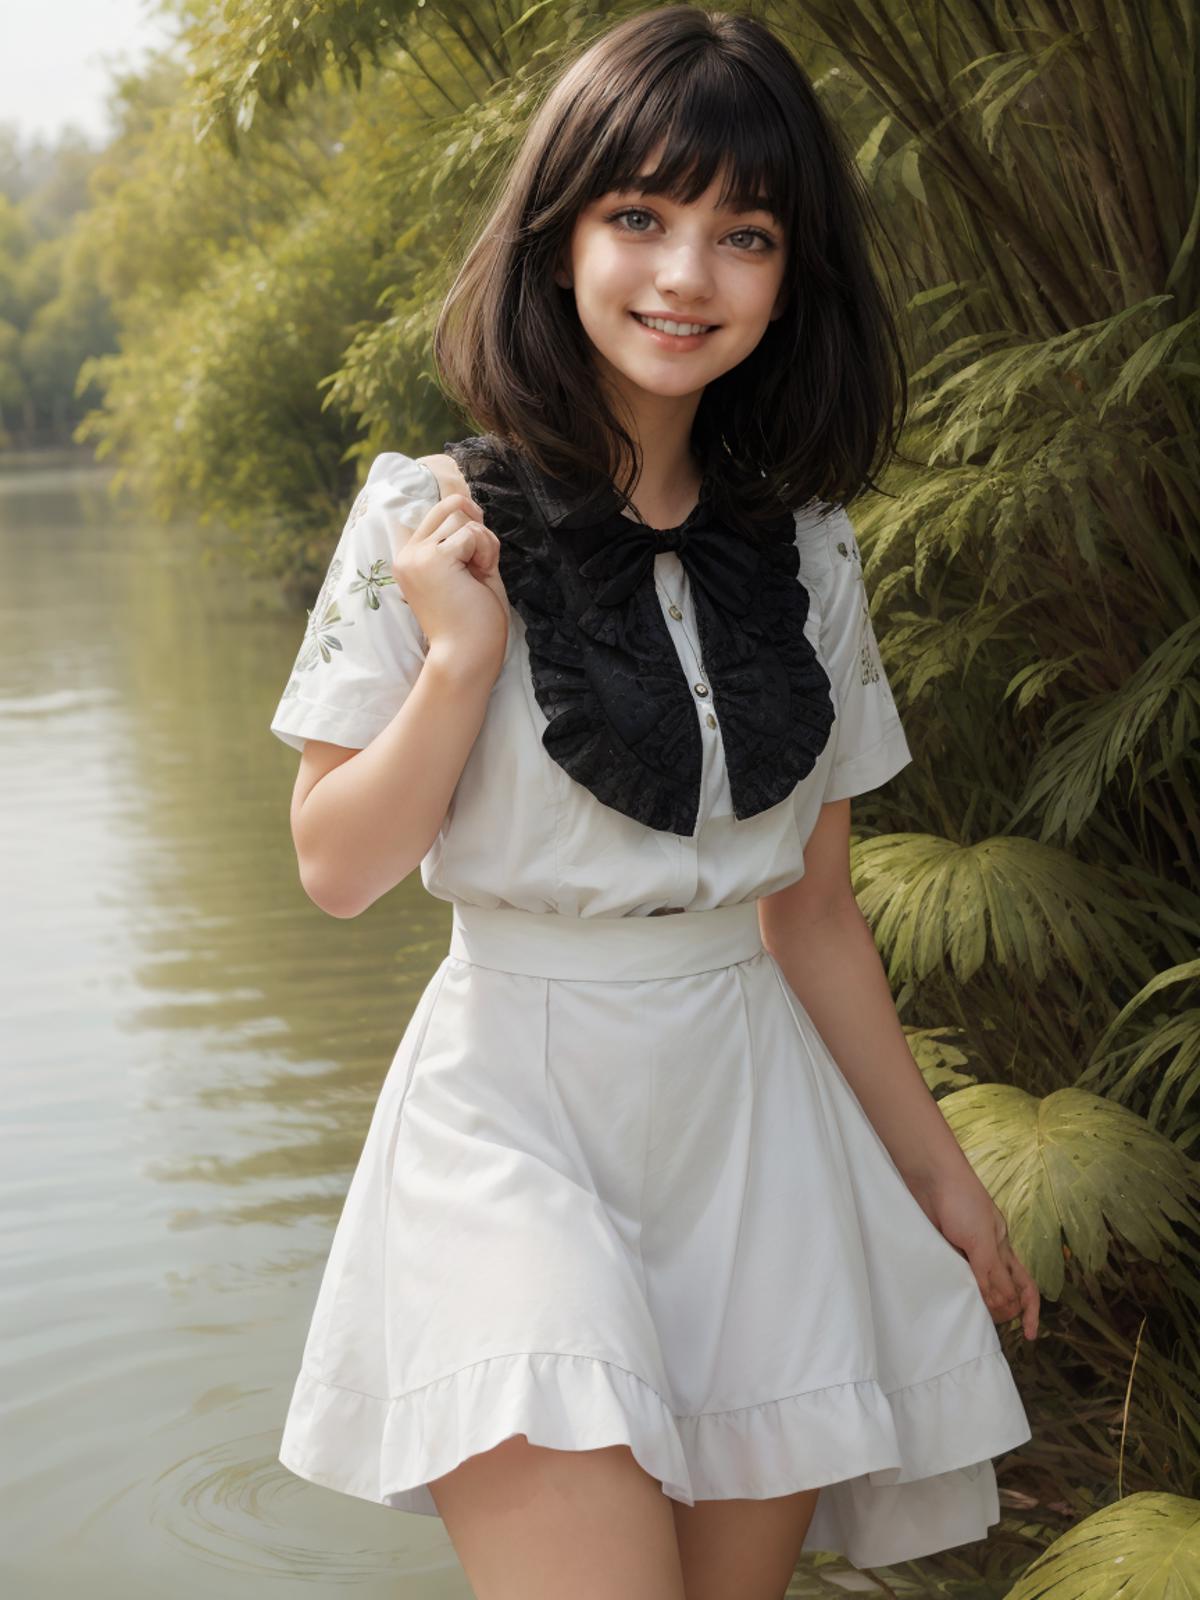 A young woman wearing a white dress with a black bow tie posing next to a body of water.